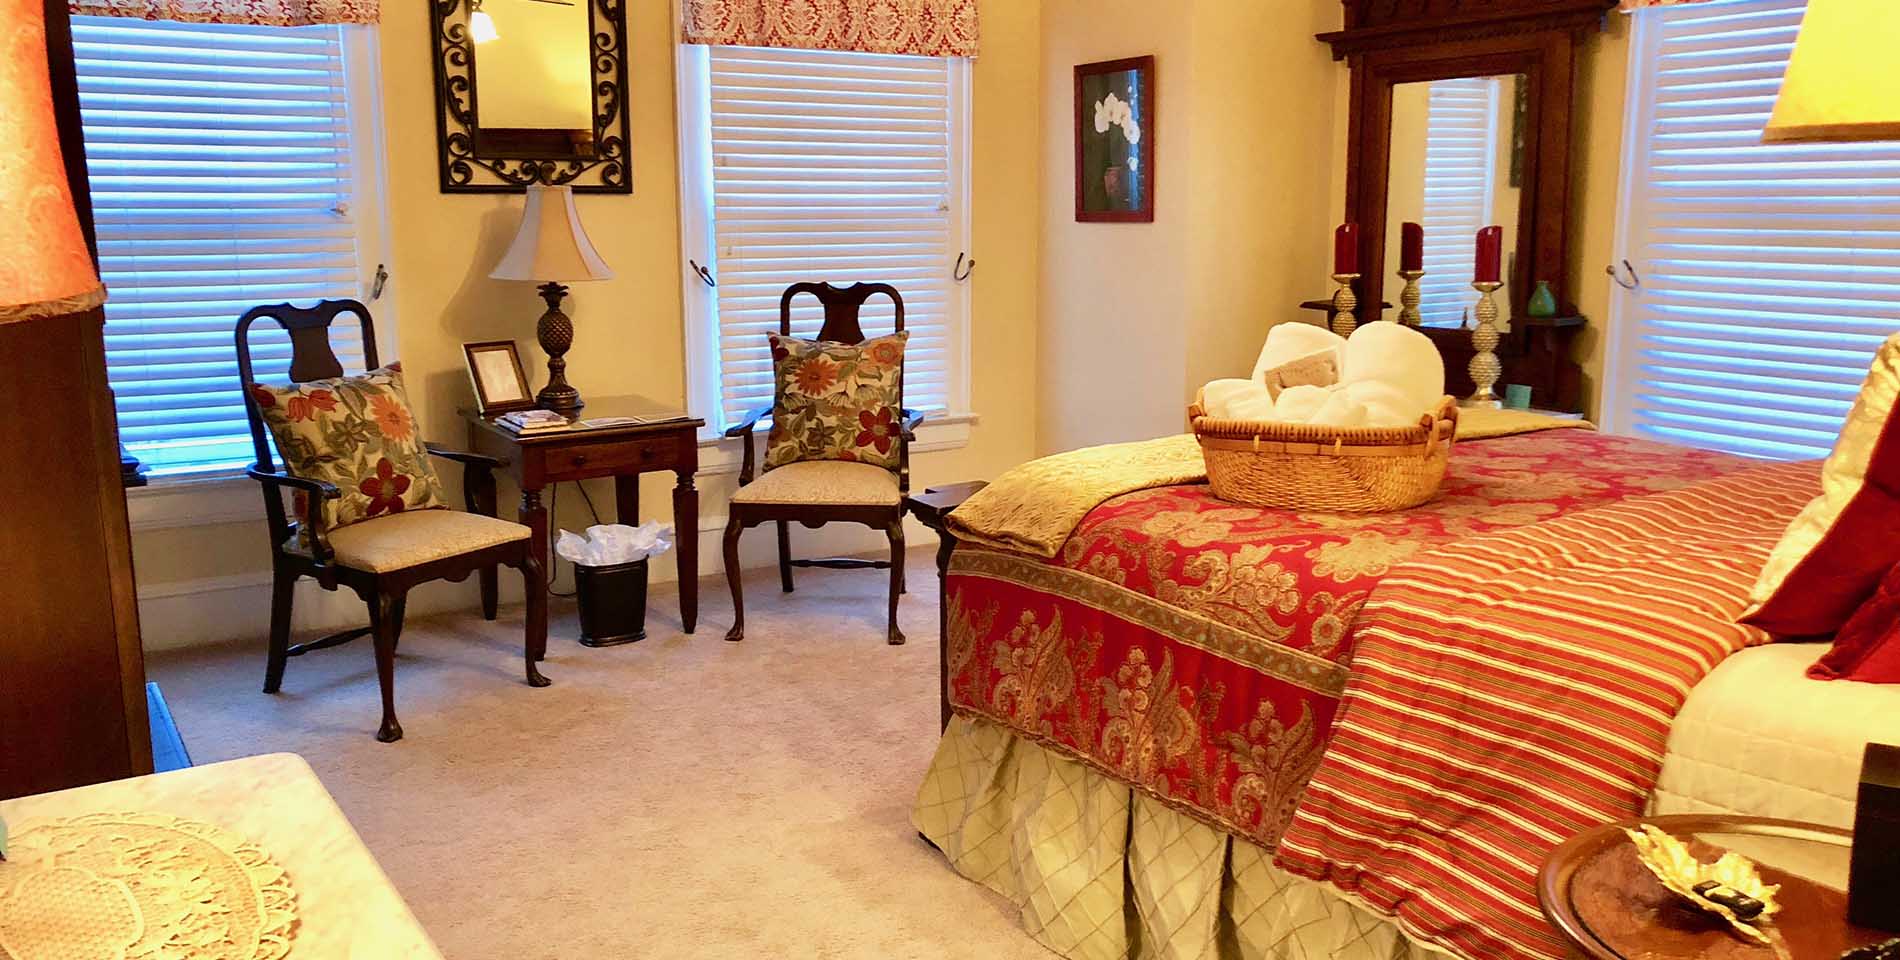 A large bed with red and gold patterned comforter, two chairs and table with floral print pillows atop a beige carpet. 